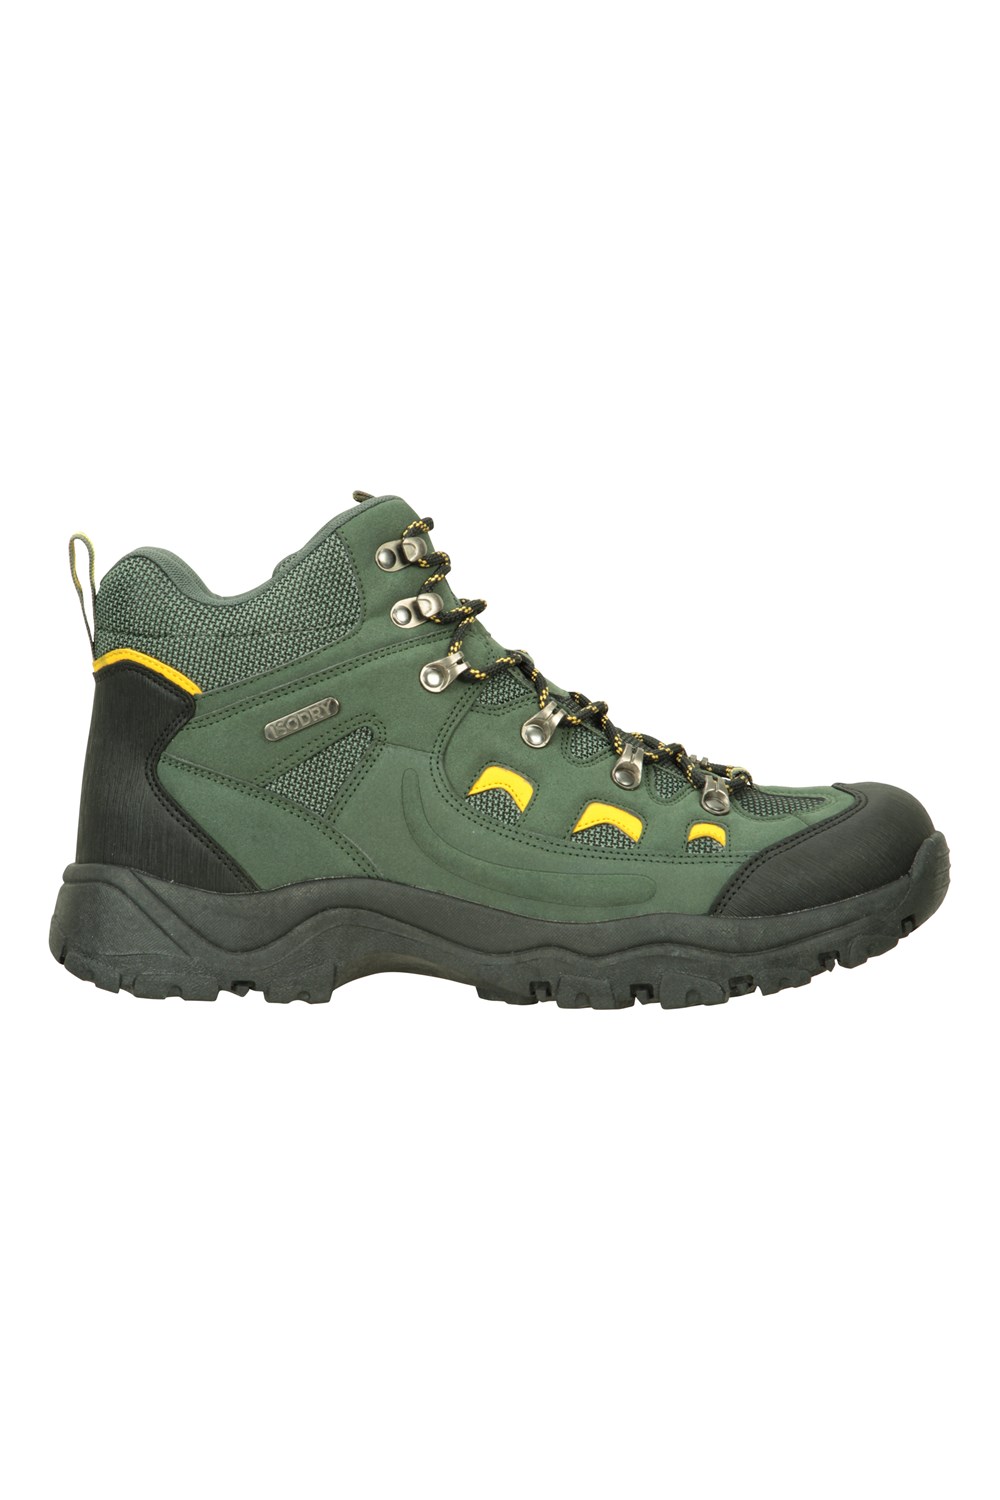 Details about   Mountain Warehouse Waterproof Hiking Boots Suede Mesh Upper Shoes